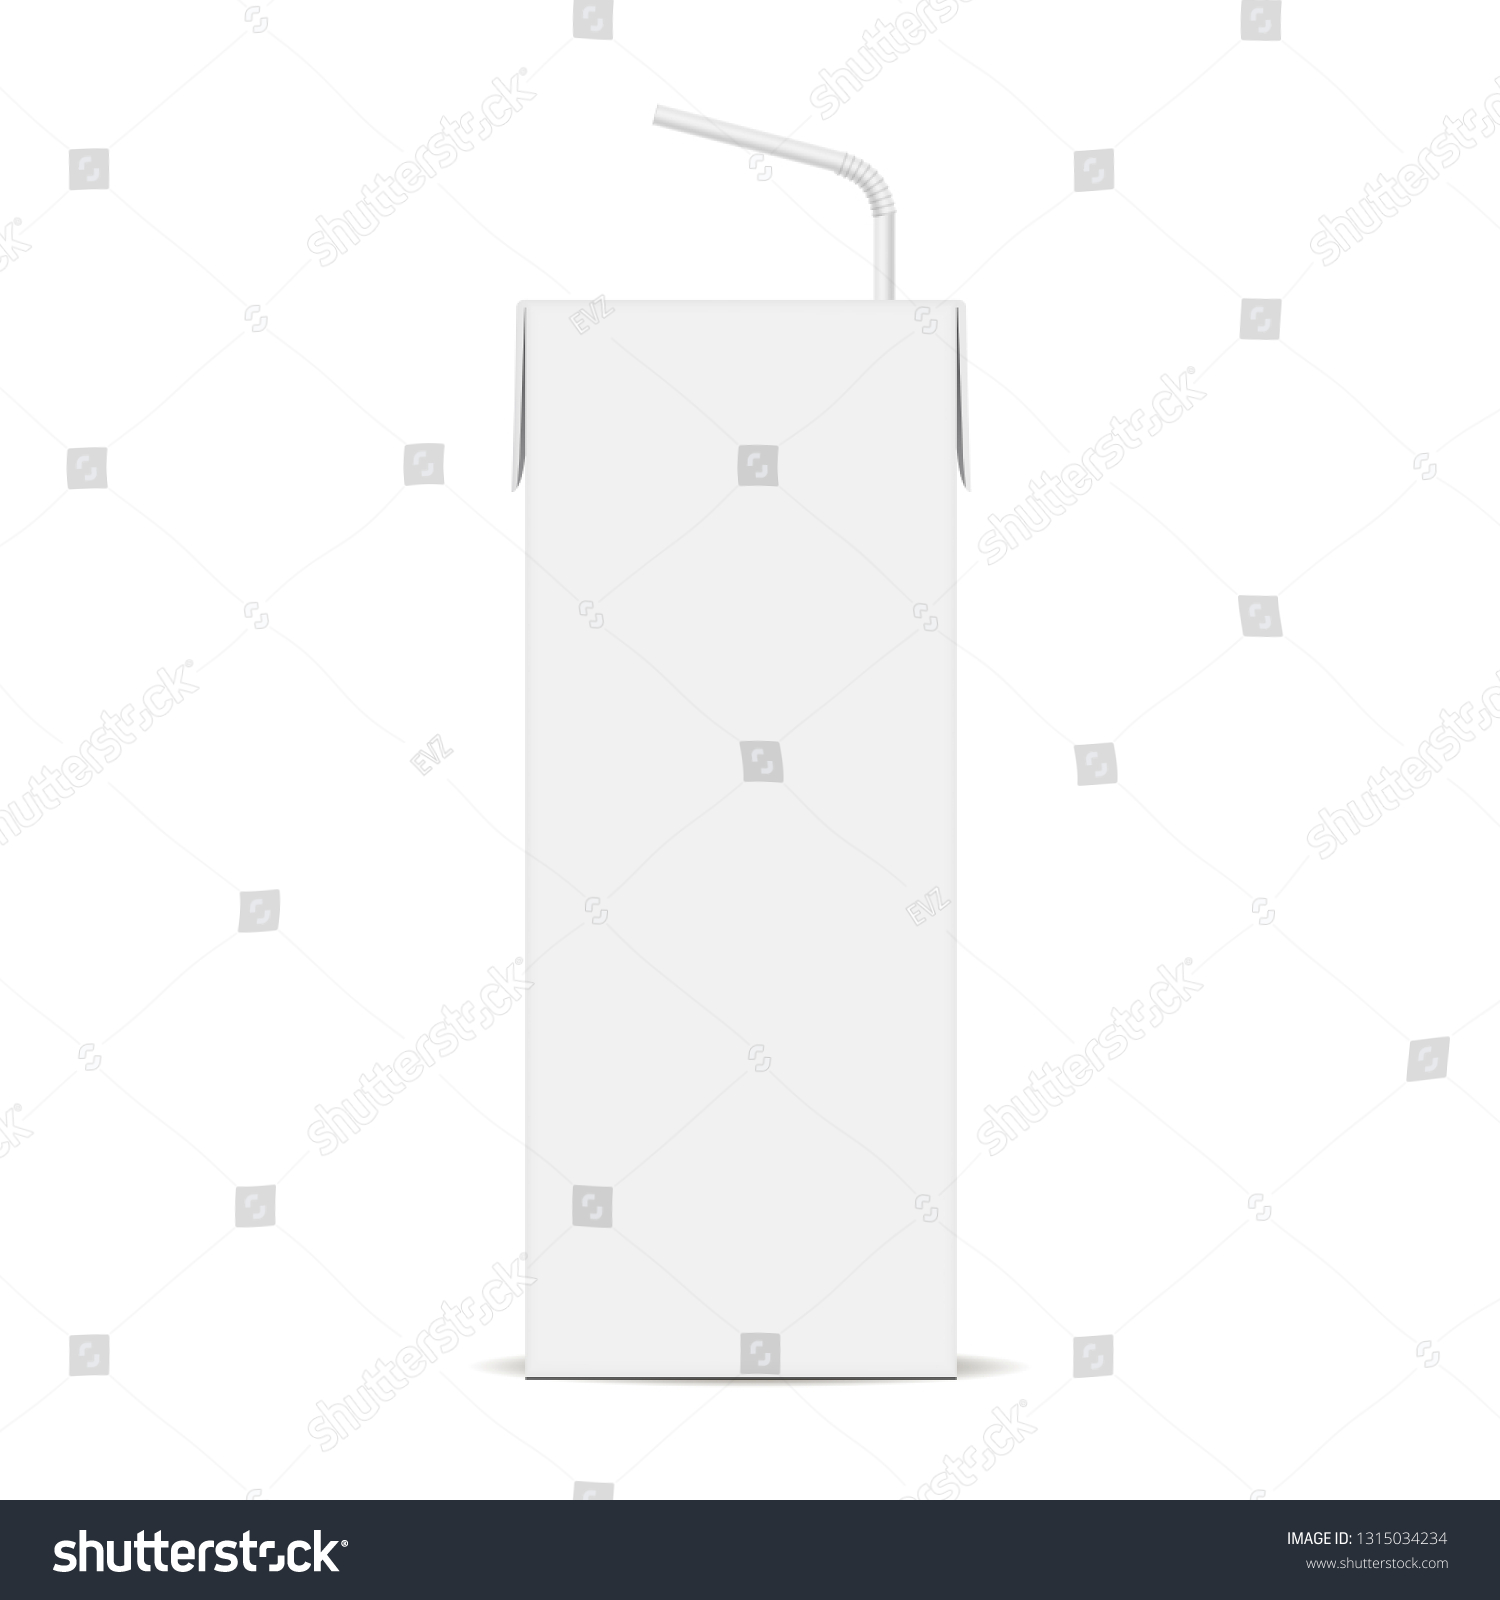 SVG of Cardboard juice box with straw mockup isolated on white background. Vector illustration svg